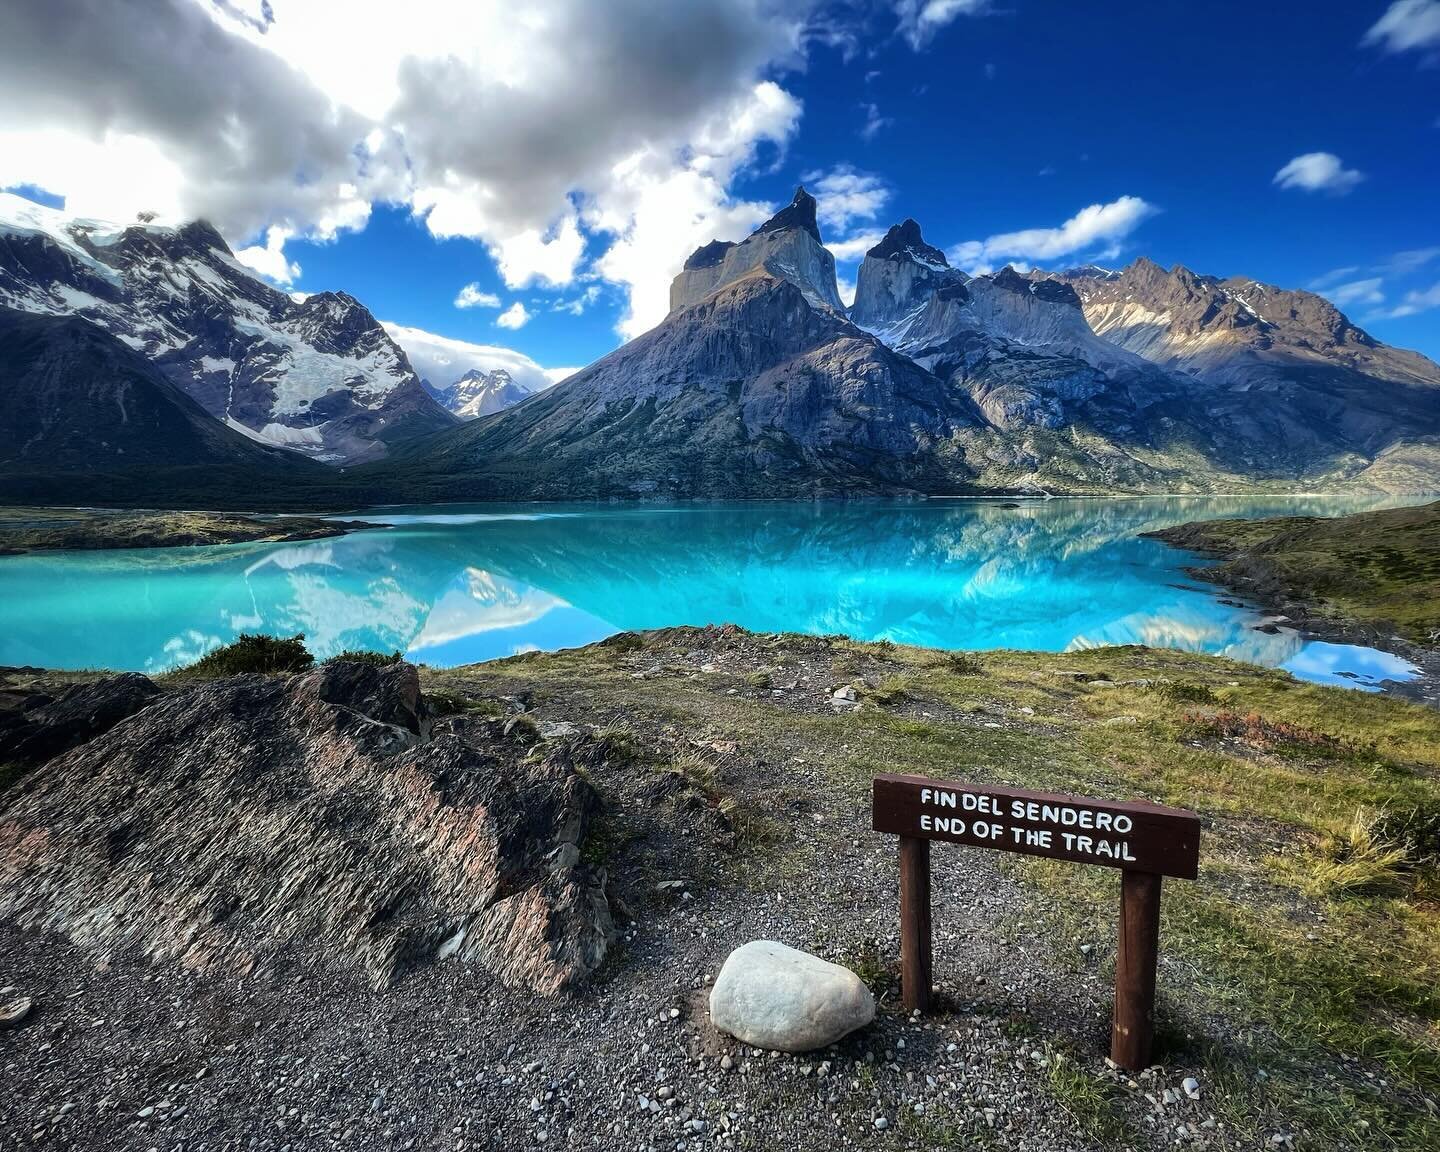 National parks are called &lsquo;America&rsquo;s Best Idea&rsquo; and are the world&rsquo;s best idea you ask me ;-) 
Some of the most stunning natural scenery and best hiking on the planet in Chile&rsquo;s Torres Del Paine National Park, and while t